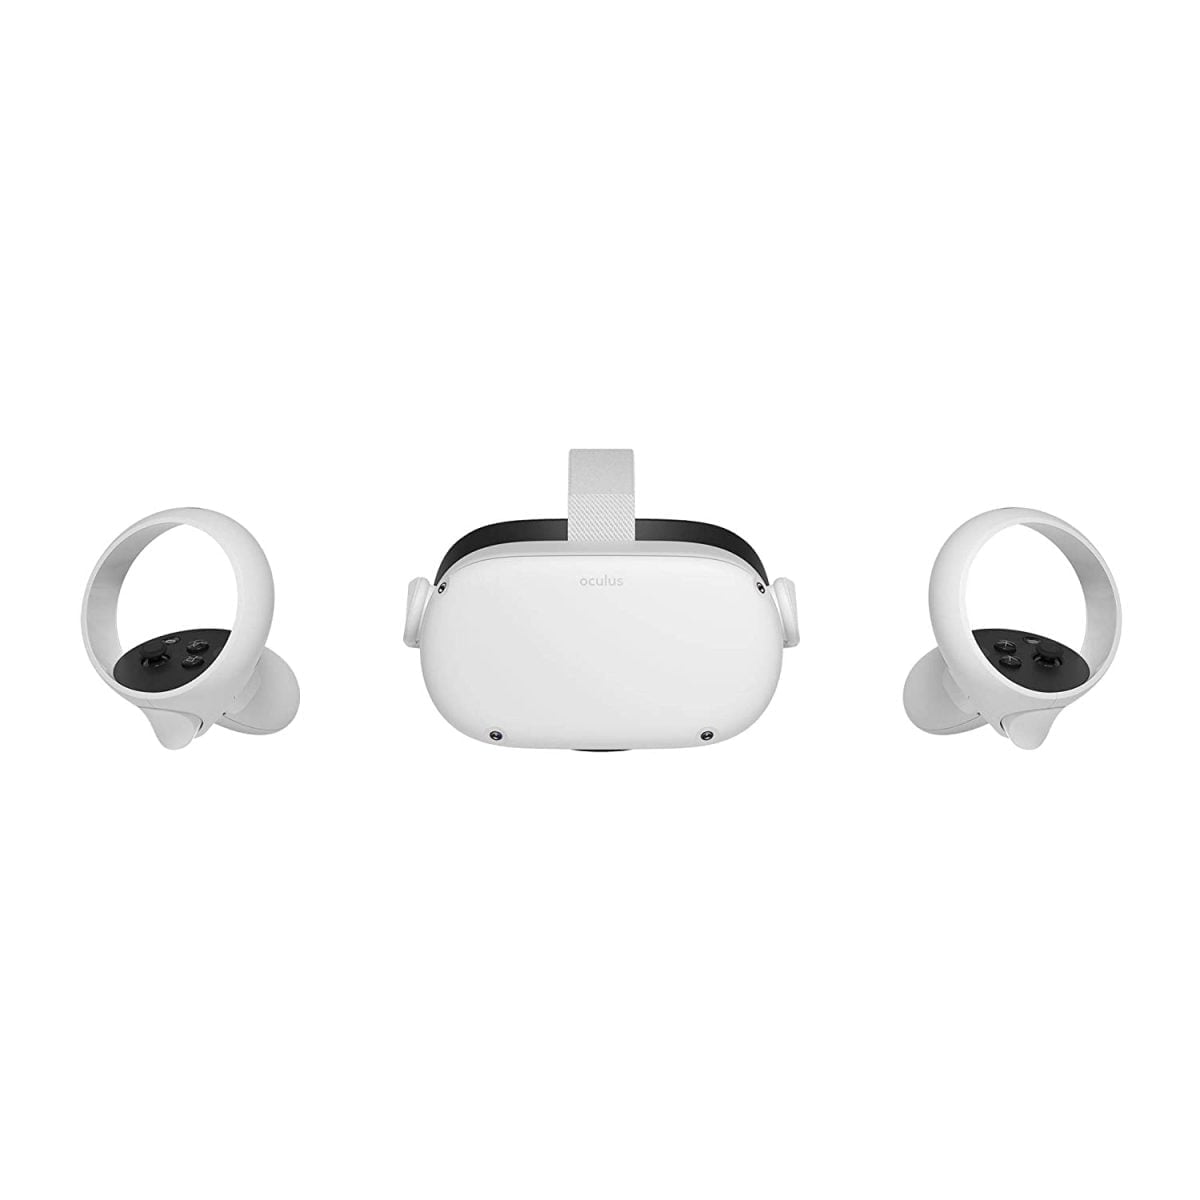 61Nrs7Qqzel. Sl1500 Oculus &Lt;H1&Gt;Oculus Quest 2 128 Gb Advanced All-In-One Virtual Reality Headset&Lt;/H1&Gt; Https://Youtu.be/Atvgl9Wojsm &Lt;Ul Class=&Quot;A-Unordered-List A-Vertical A-Spacing-Mini&Quot;&Gt; &Lt;Li&Gt;&Lt;Span Class=&Quot;A-List-Item&Quot;&Gt;Voltage: 100-240 V&Lt;/Span&Gt;&Lt;/Li&Gt; &Lt;Li&Gt;&Lt;Span Class=&Quot;A-List-Item&Quot;&Gt;Next-Level Hardware - Make Every Move Count With A Blazing-Fast Processor And Our Highest-Resolution Display&Lt;/Span&Gt;&Lt;/Li&Gt; &Lt;Li&Gt;&Lt;Span Class=&Quot;A-List-Item&Quot;&Gt;All-In-One Gaming - With Backward Compatibility, You Can Explore New Titles And Old Favorites In The Expansive Quest Content Library&Lt;/Span&Gt;&Lt;/Li&Gt; &Lt;Li&Gt;&Lt;Span Class=&Quot;A-List-Item&Quot;&Gt;Immersive Entertainment - Get The Best Seat In The House To Live Concerts, Groundbreaking Films, Exclusive Events And More&Lt;/Span&Gt;&Lt;/Li&Gt; &Lt;Li&Gt;&Lt;Span Class=&Quot;A-List-Item&Quot;&Gt;Easy Setup - Just Open The Box, Set Up With The Smartphone App And Jump Into Vr. No Pc Or Console Needed. Requires Wireless Internet Access And The Oculus App (Free Download) To Set Up Device Premium Display - Catch Every Detail With A Stunning Display That Features 50% More Pixels Than The Original Quest Ultimate Control - Redesigned Oculus Touch Controllers Transport Your Movements Directly Into Vr With Intuitive Controls Pc Vr Compatible - Step Into Incredible Oculus Rift Titles By Connecting An Oculus Link Cable To A Compatible Gaming Pc. Oculus Link Cable Sold Separately 3D Cinematic Sound - Hear In All Directions With Built-In Speakers That Deliver Cinematic 3D Positional Audio&Lt;/Span&Gt;&Lt;/Li&Gt; &Lt;/Ul&Gt; &Nbsp; Oculus Quest Meta Quest 2 128 Gb Advanced All-In-One Virtual Reality Headset